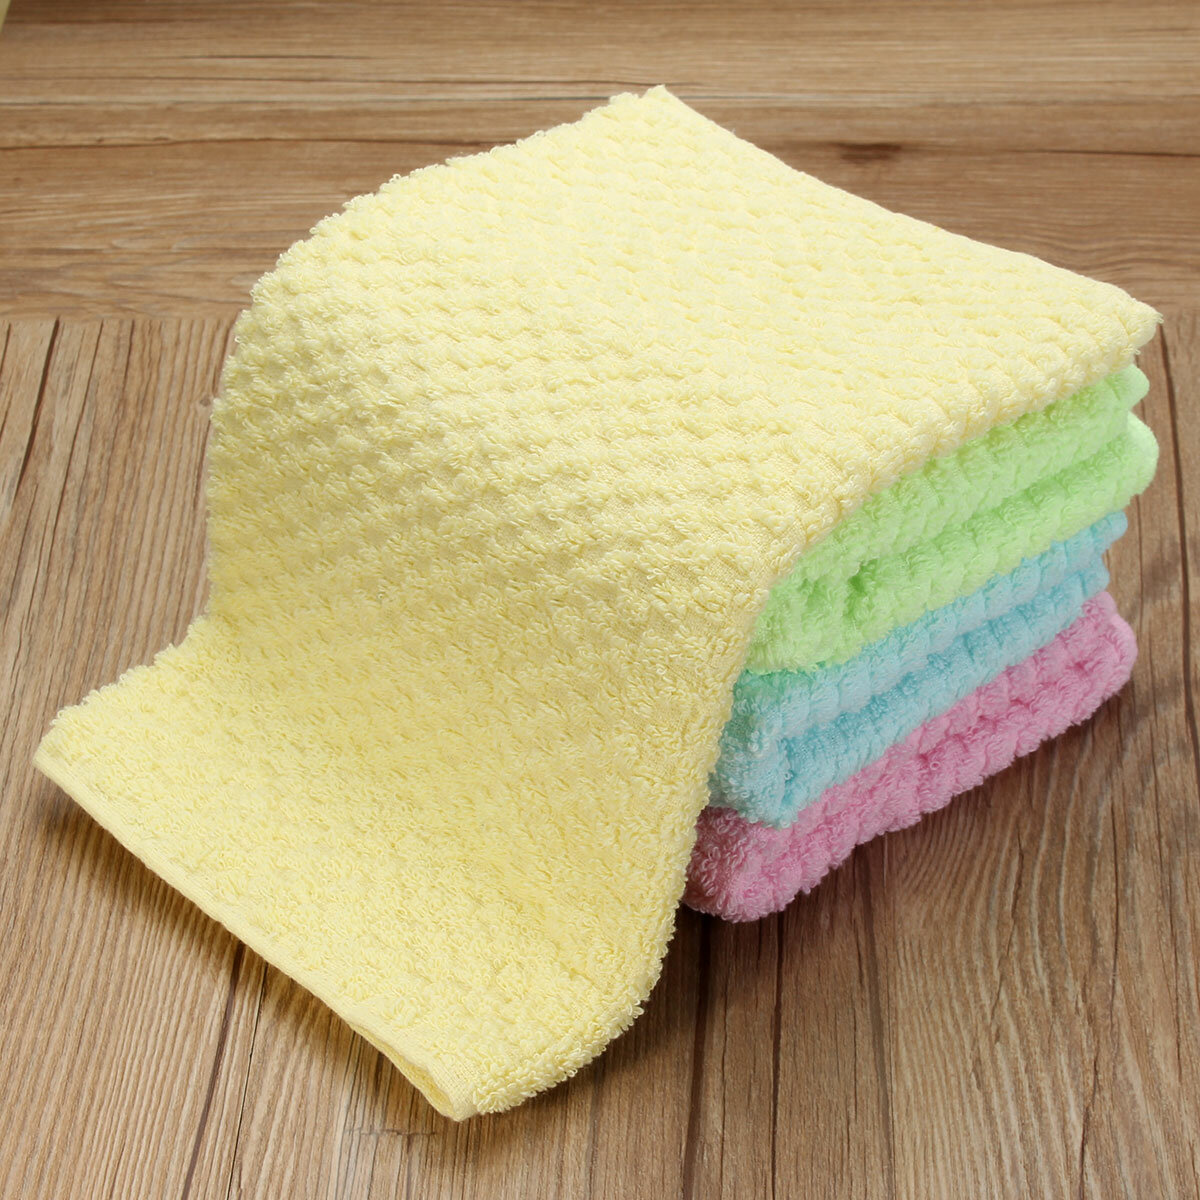 72x31cm Absorbent Cotton Jacquard Weave Towel For Home Camping Travelling